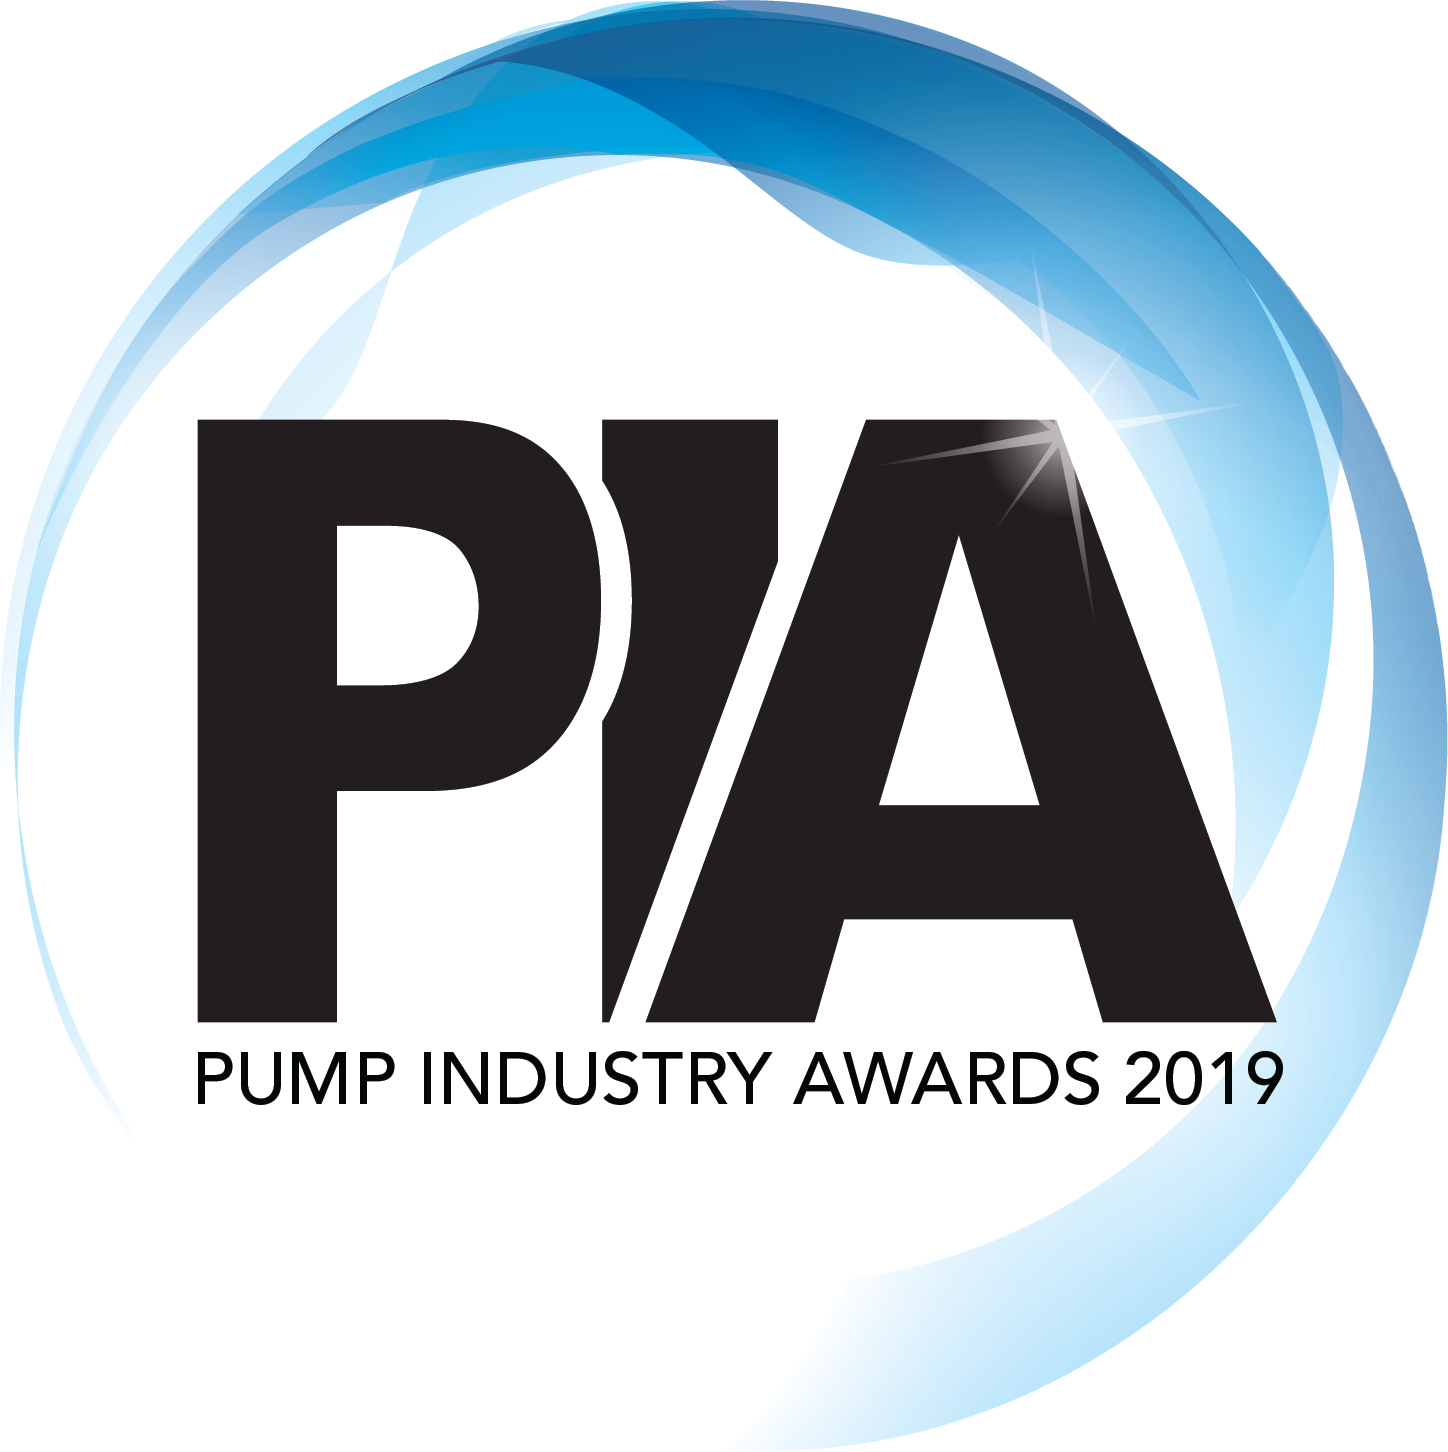 Pump Industry Awards - Recognizing service and motivating commitment.